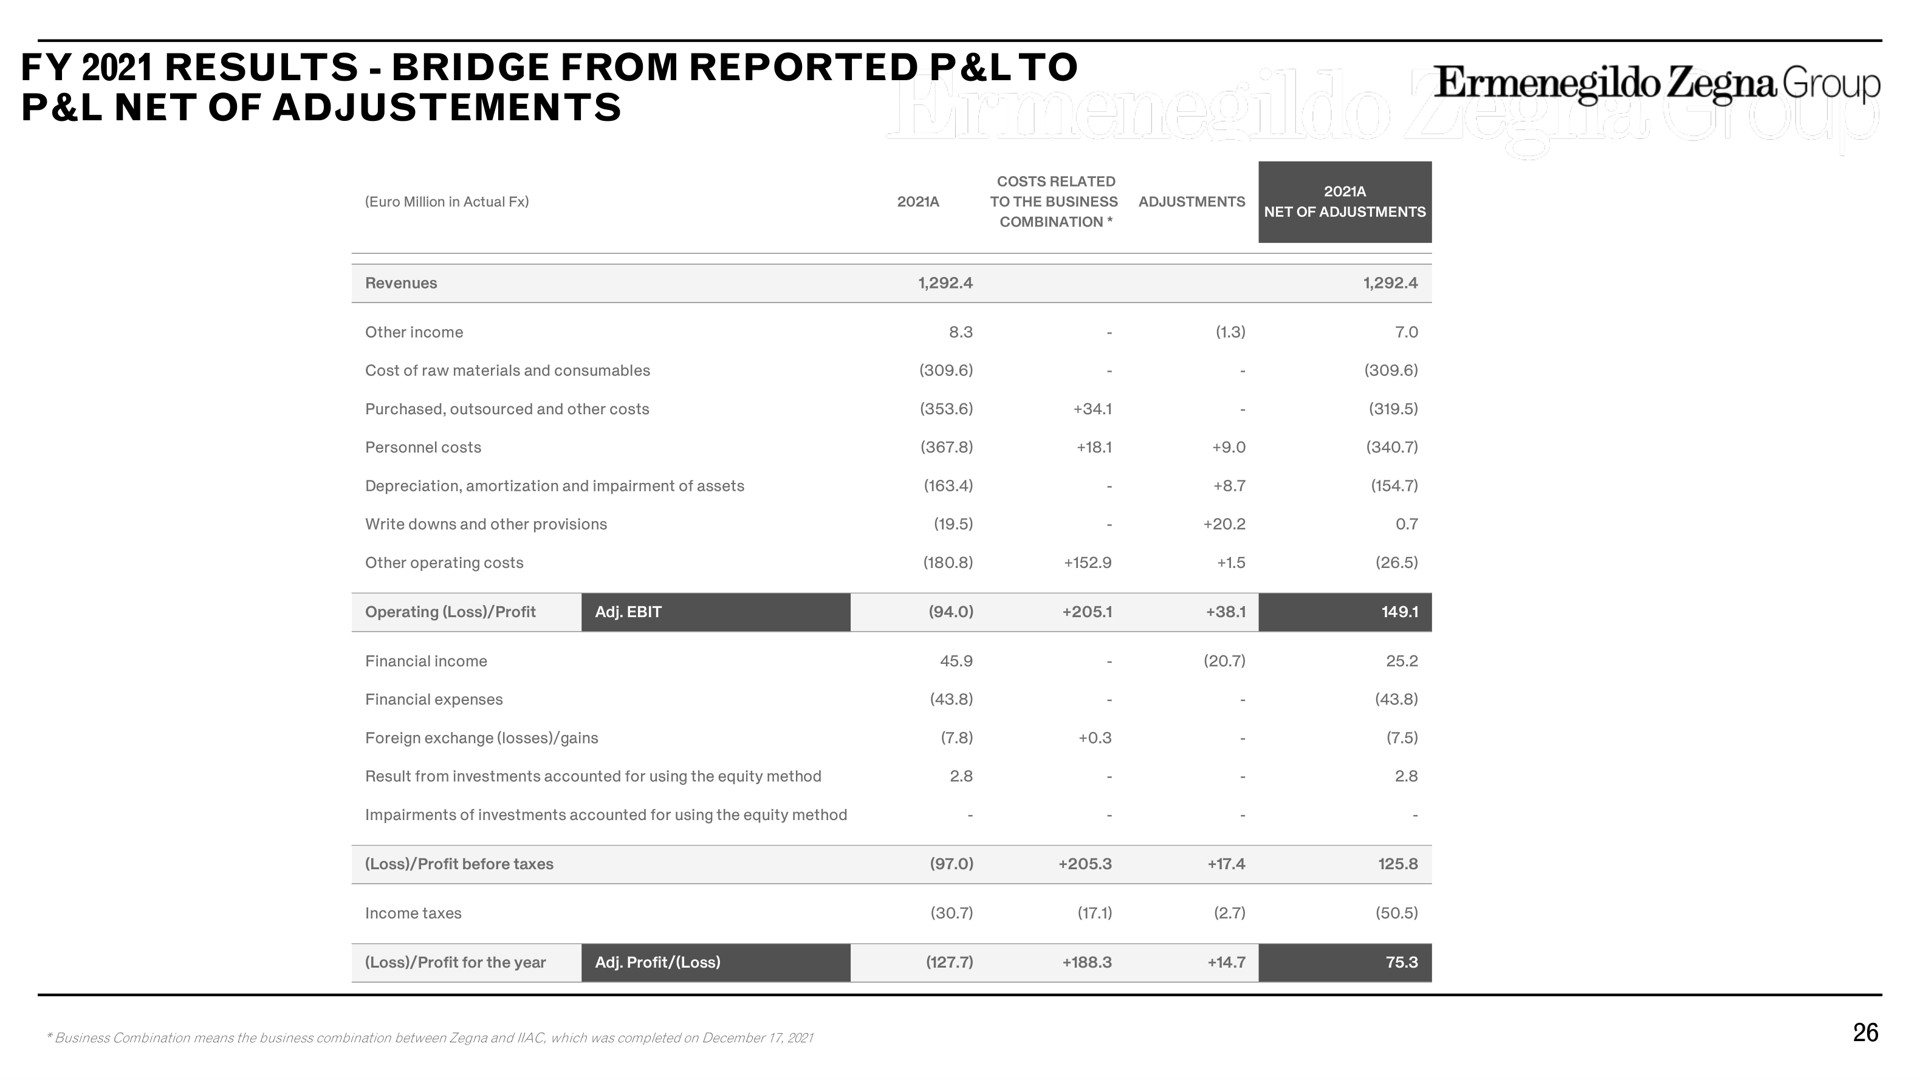 results bridge from reported to net of results group | Zegna